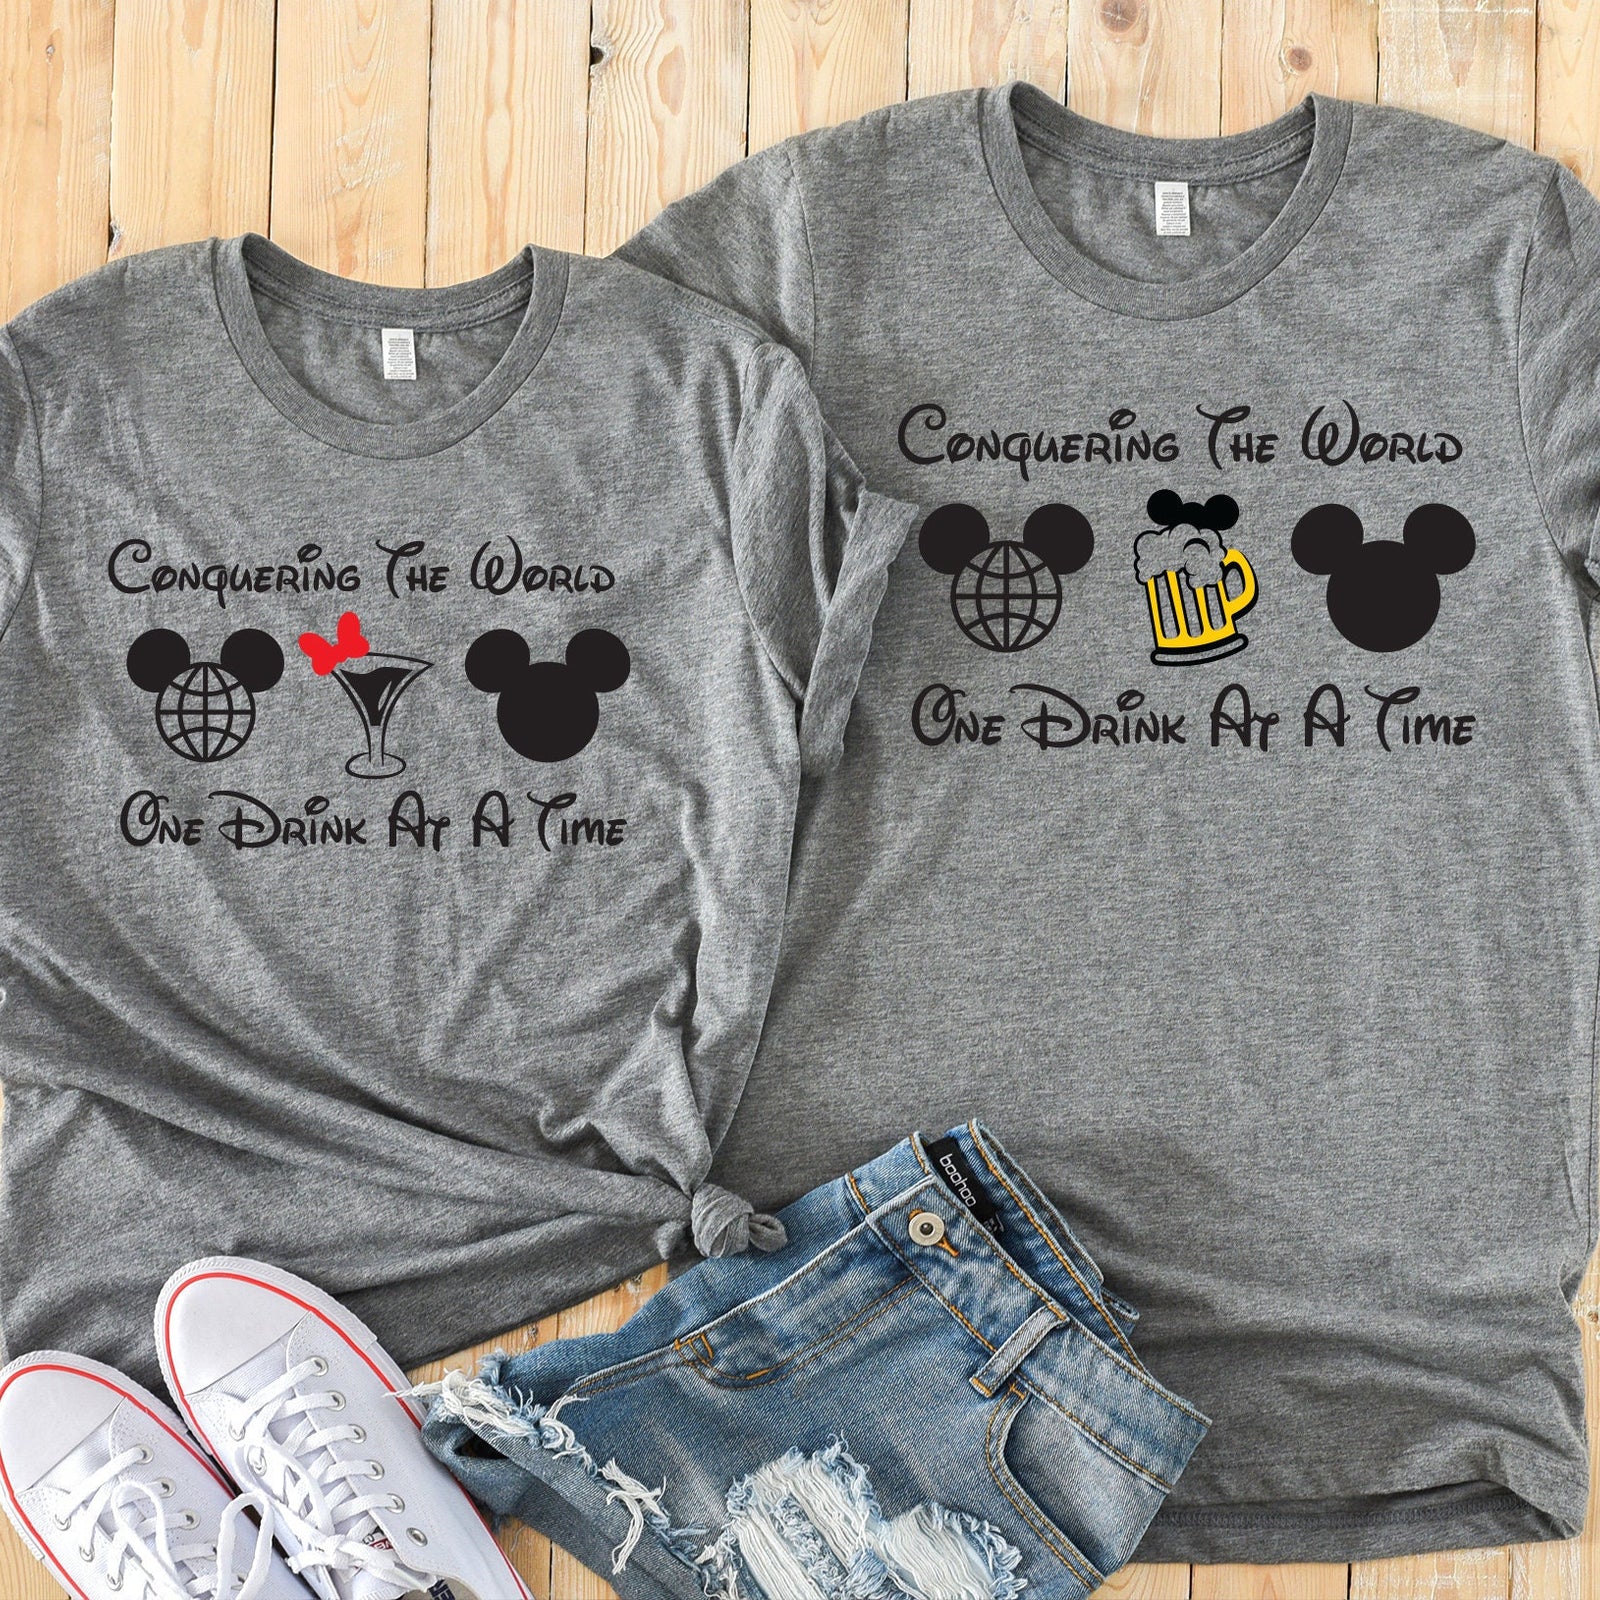 Conquering the World One Drink at a Time Matching Disney Shirts - Disney Couples Shirt - Epcot Food and Wine Festival - Drinking T Shirts